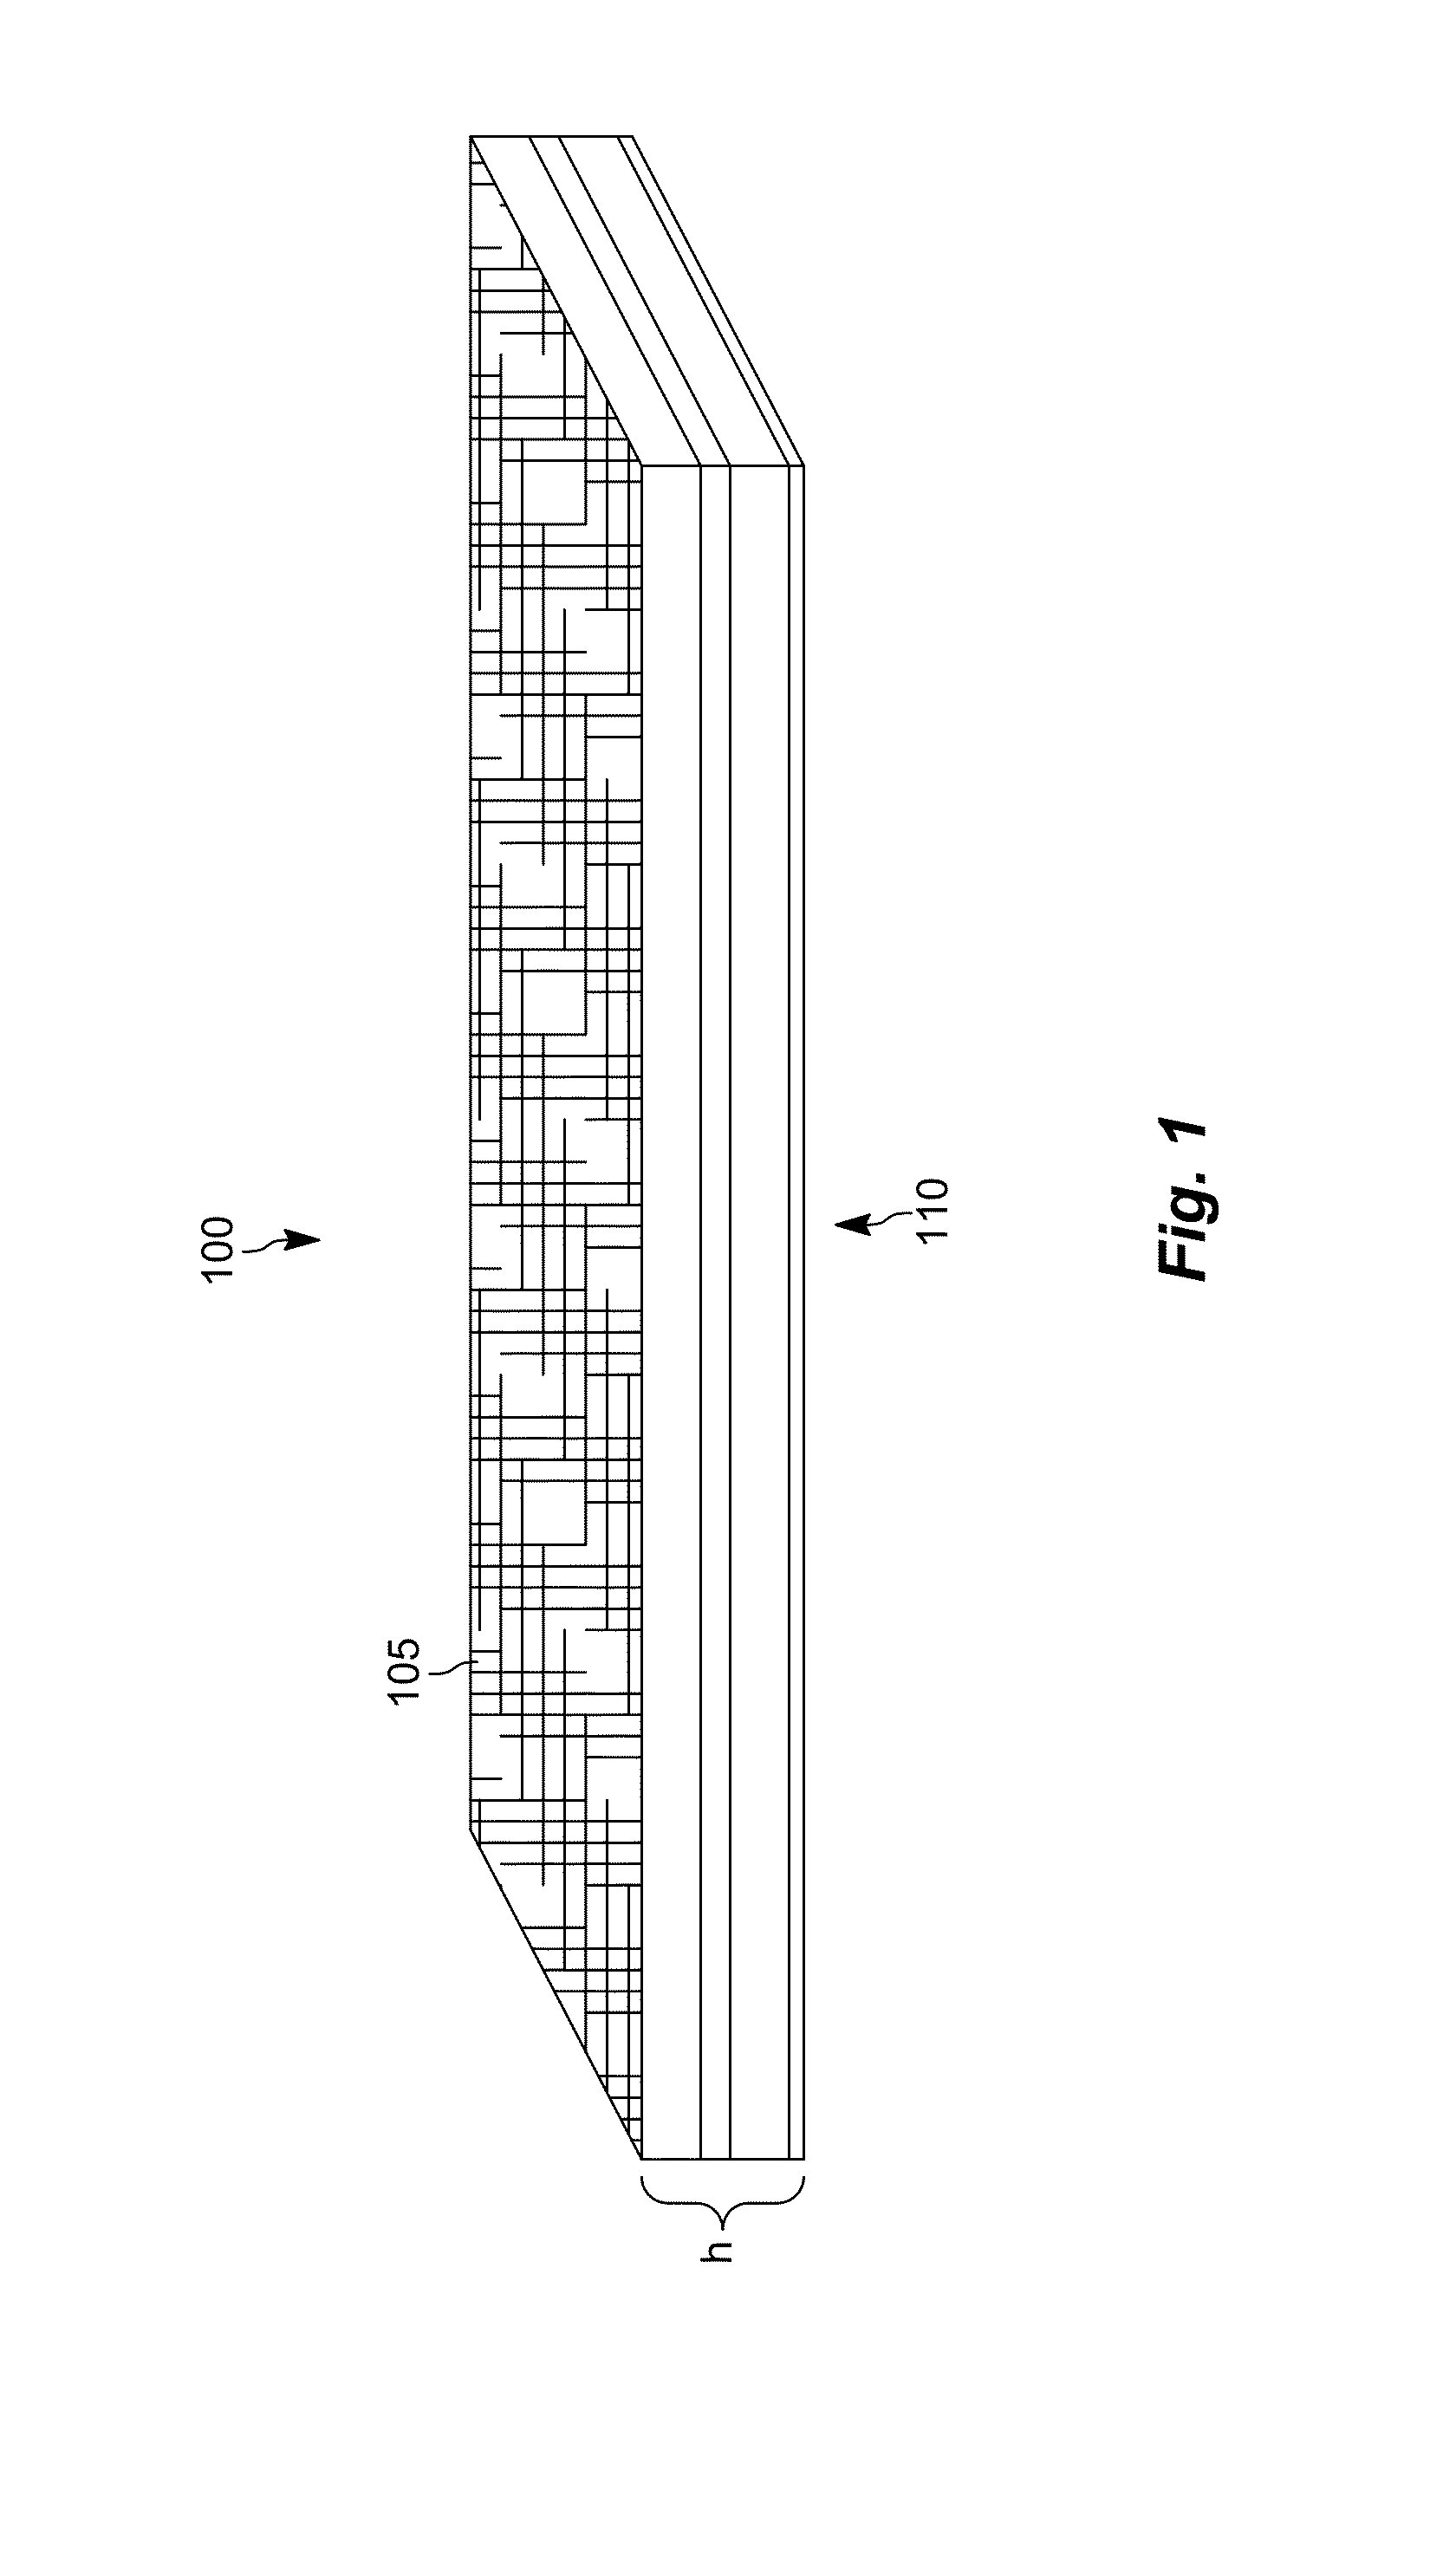 Composite tile systems and methods